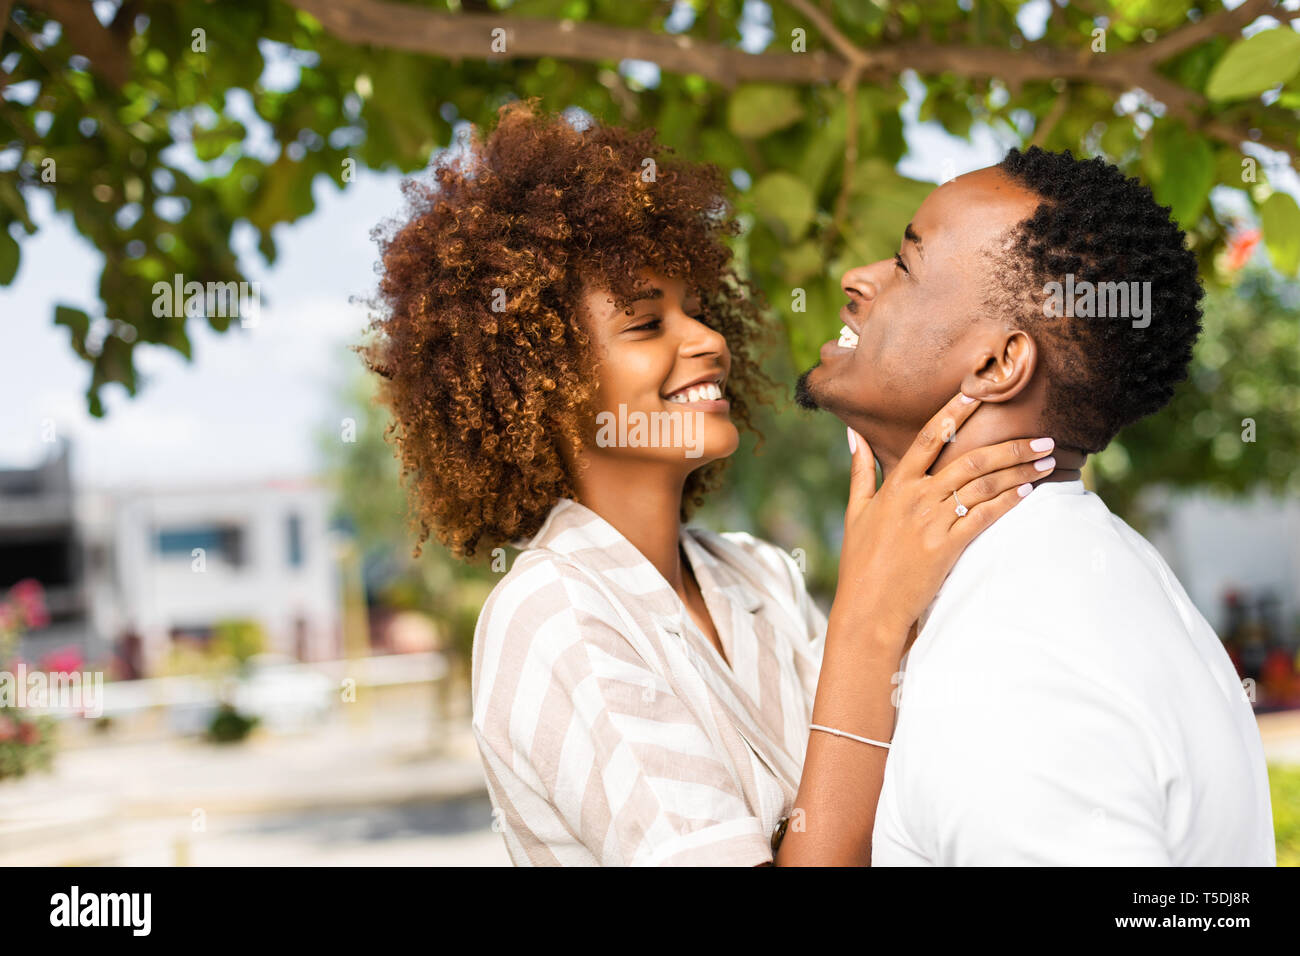 Outdoor Protrait Of Black African American Couple Kissing Each Other